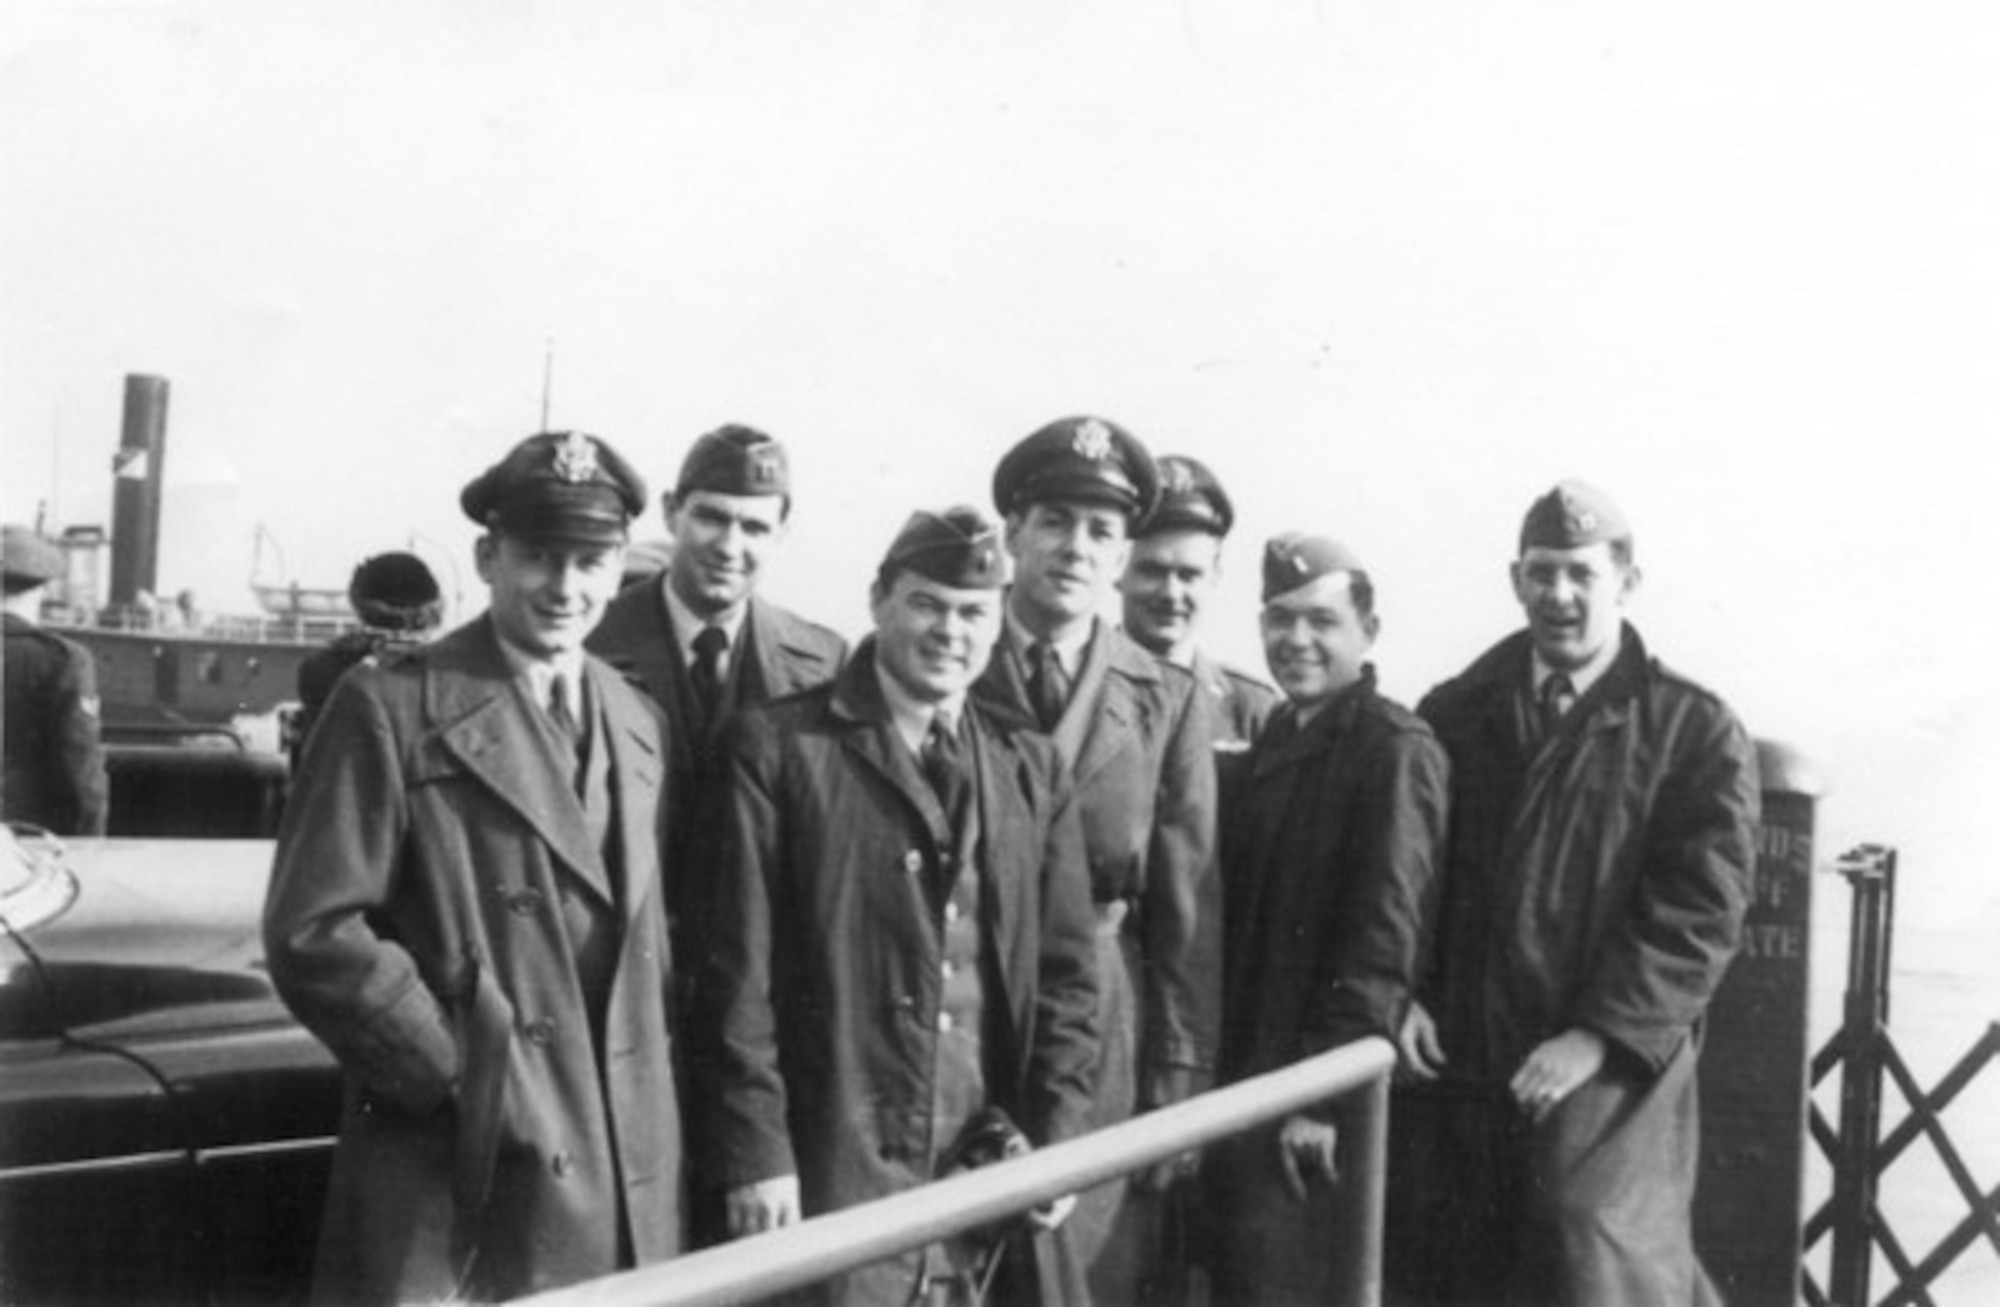 Back in the U.S.A. from the left Lt. Bud Nelson, Capt. Don Oldis, Lt. Tommy Greene, Lt. Jack Savage, Lt. Gordon Young, Lt. Dick Sulzbach and Capt. Neil Fugate return on a ship from their top secret mission in England in 1952.